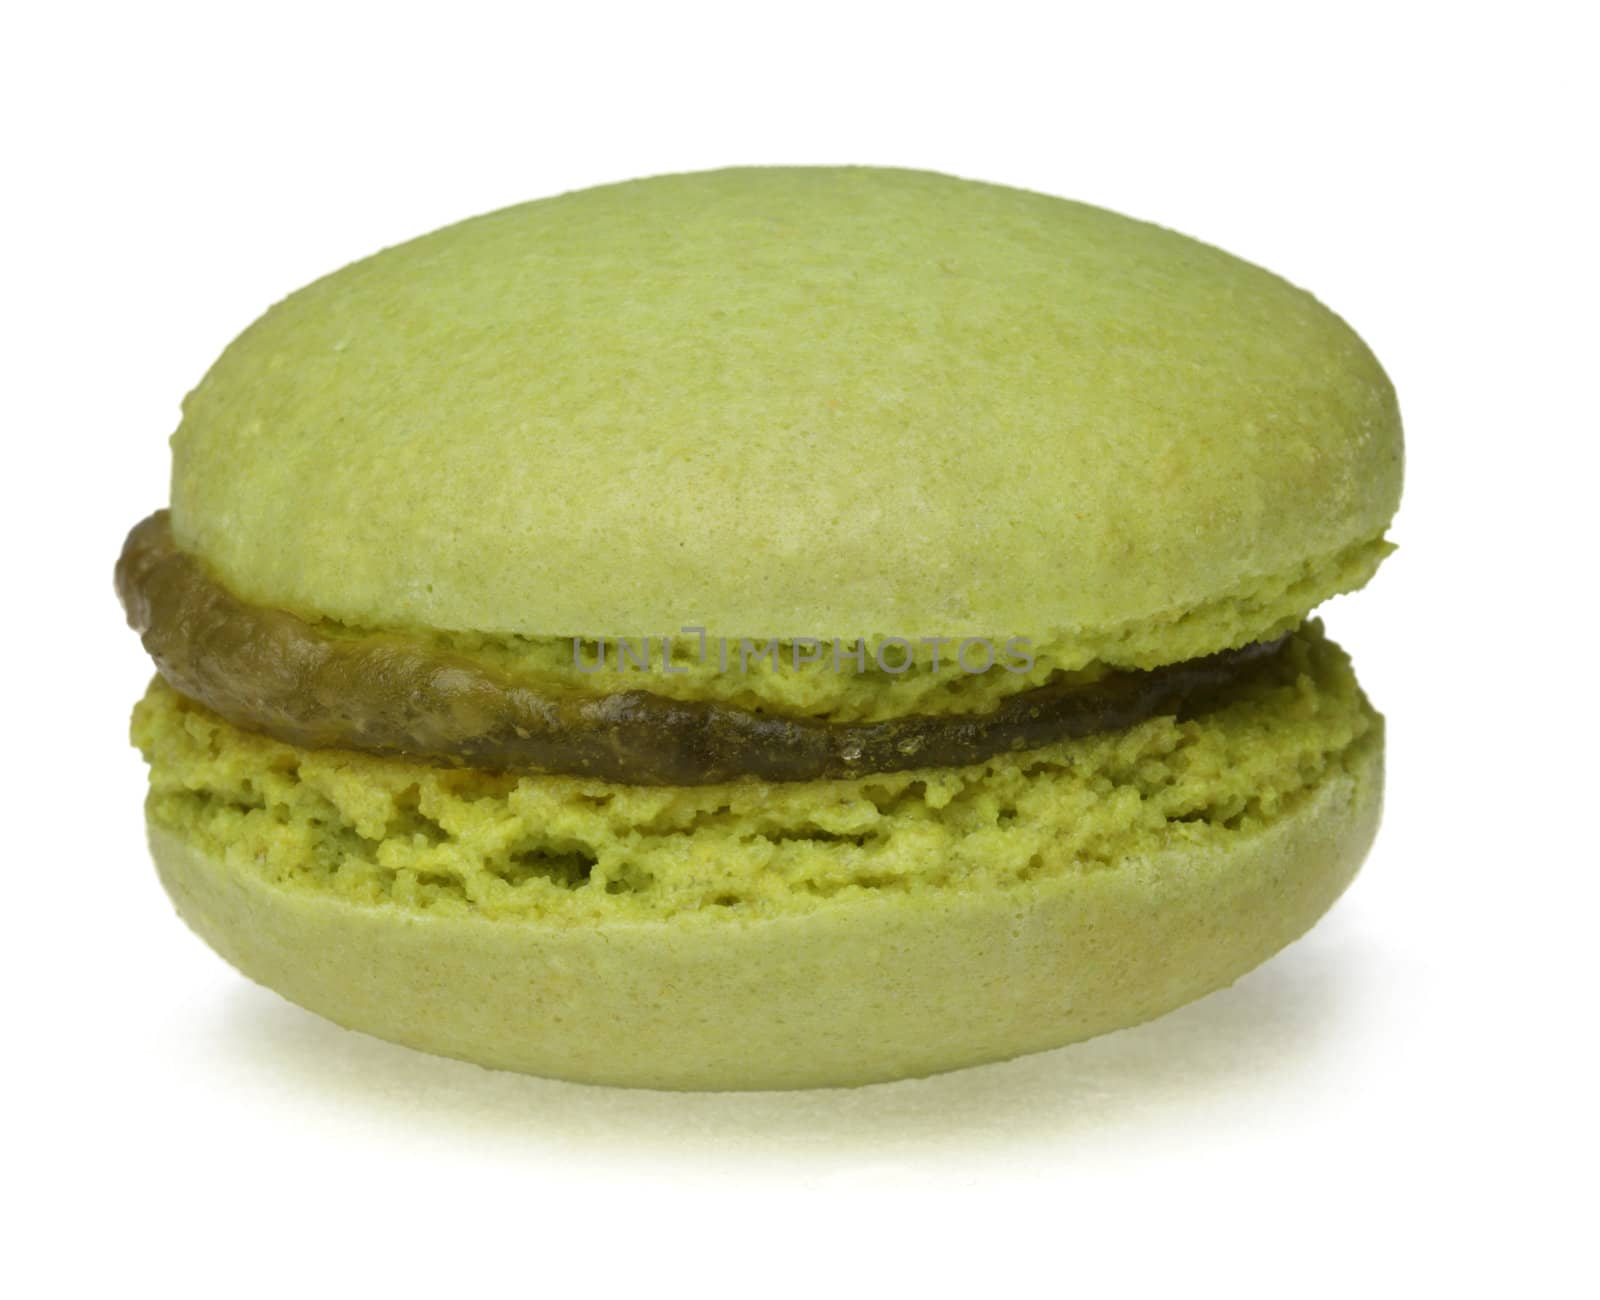 Macro image of a green macaron on a white surface.